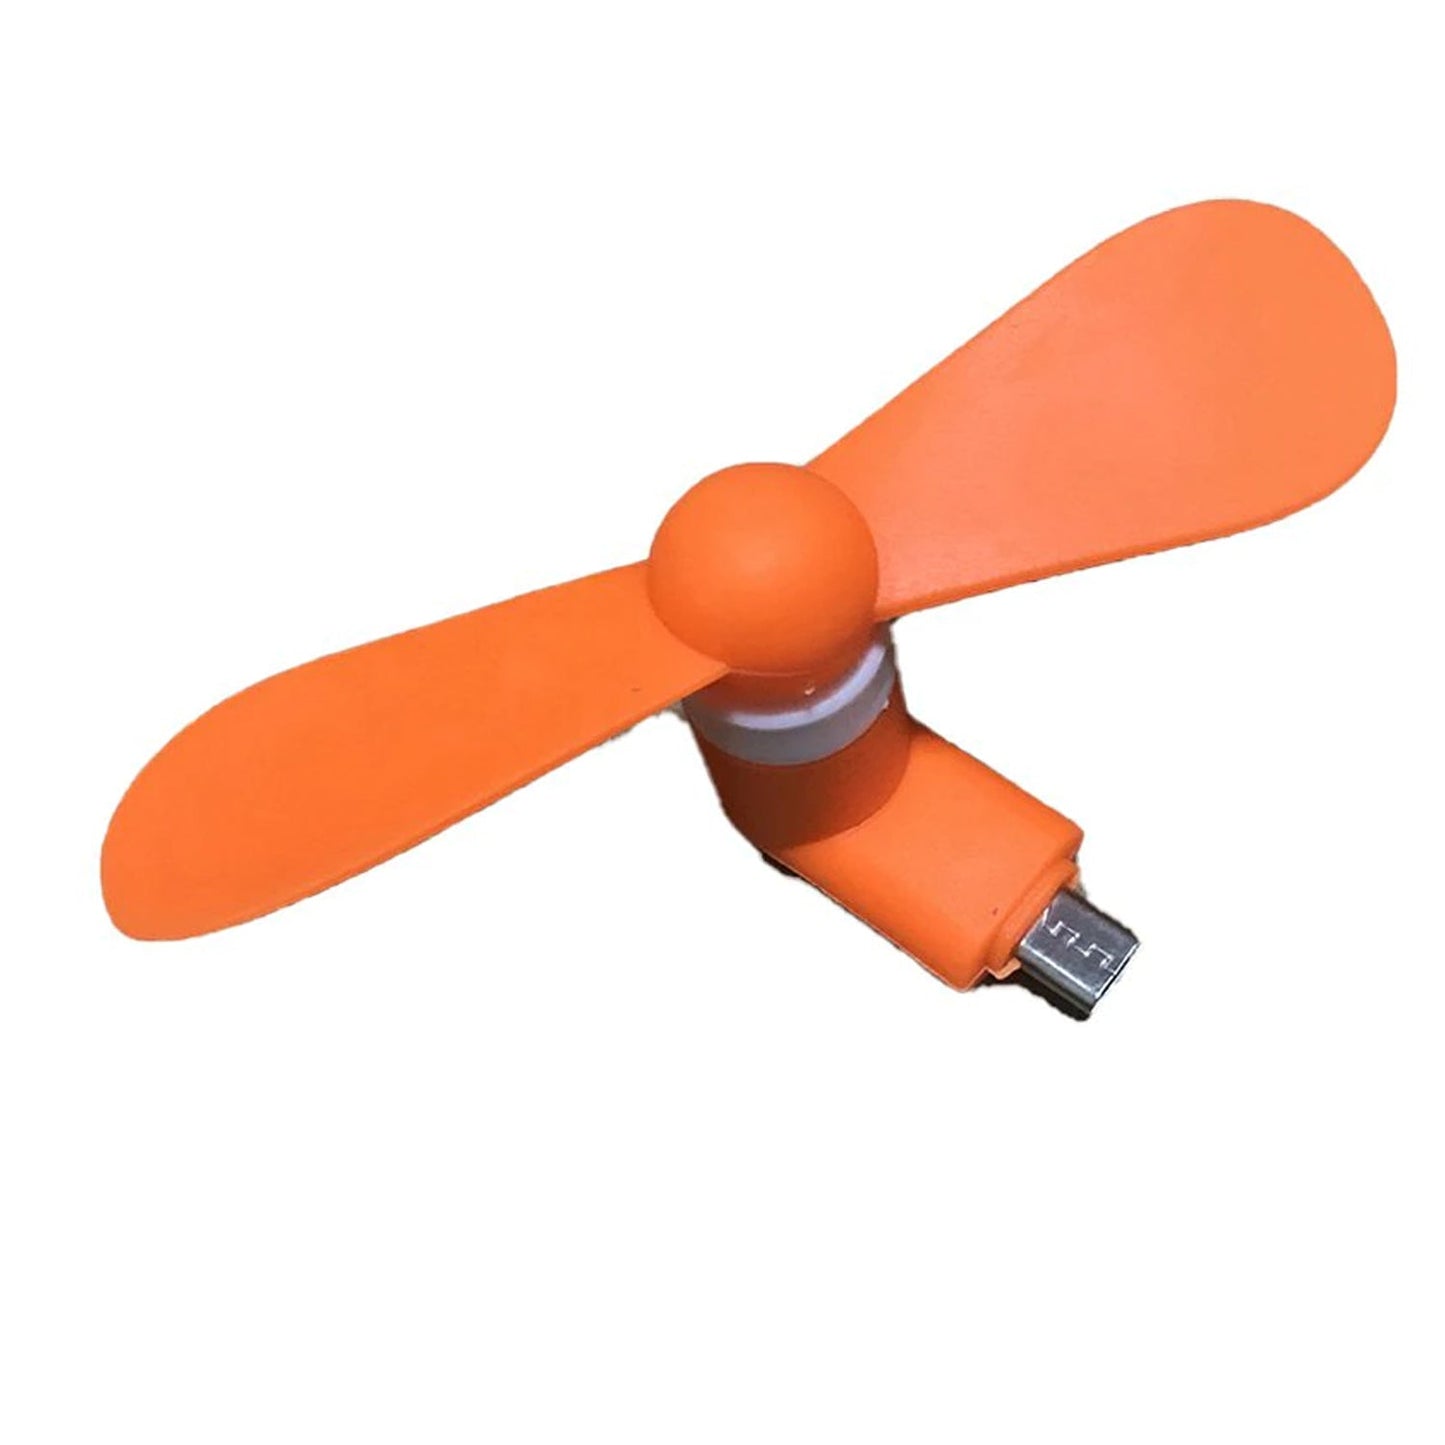 6183 mini usb fan For Having cool air instantly, anywhere and anytime purposes.